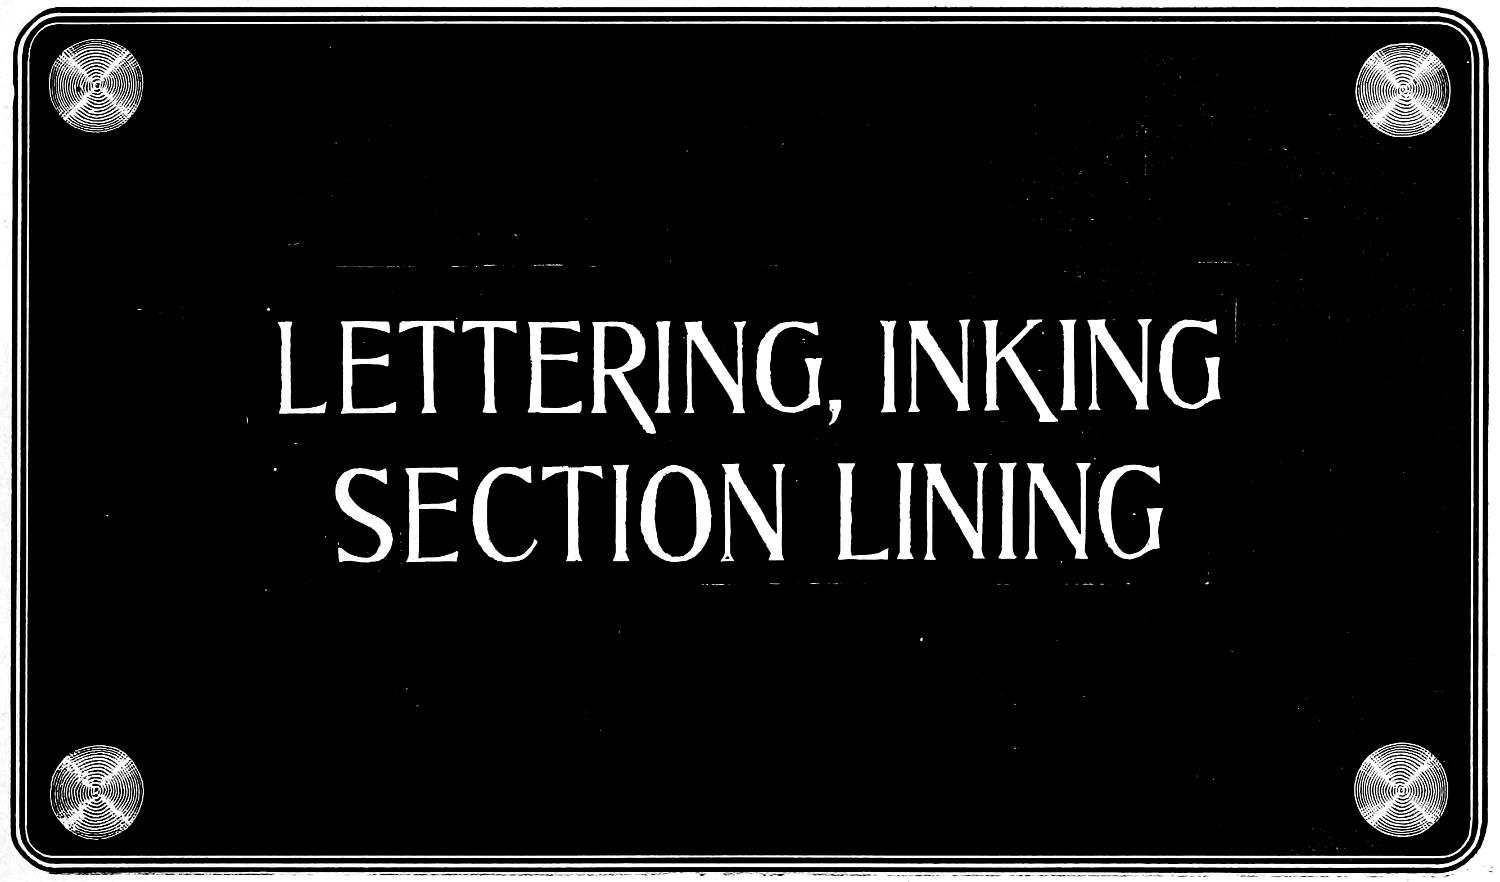 LETTERING, INKING, SECTION LINING